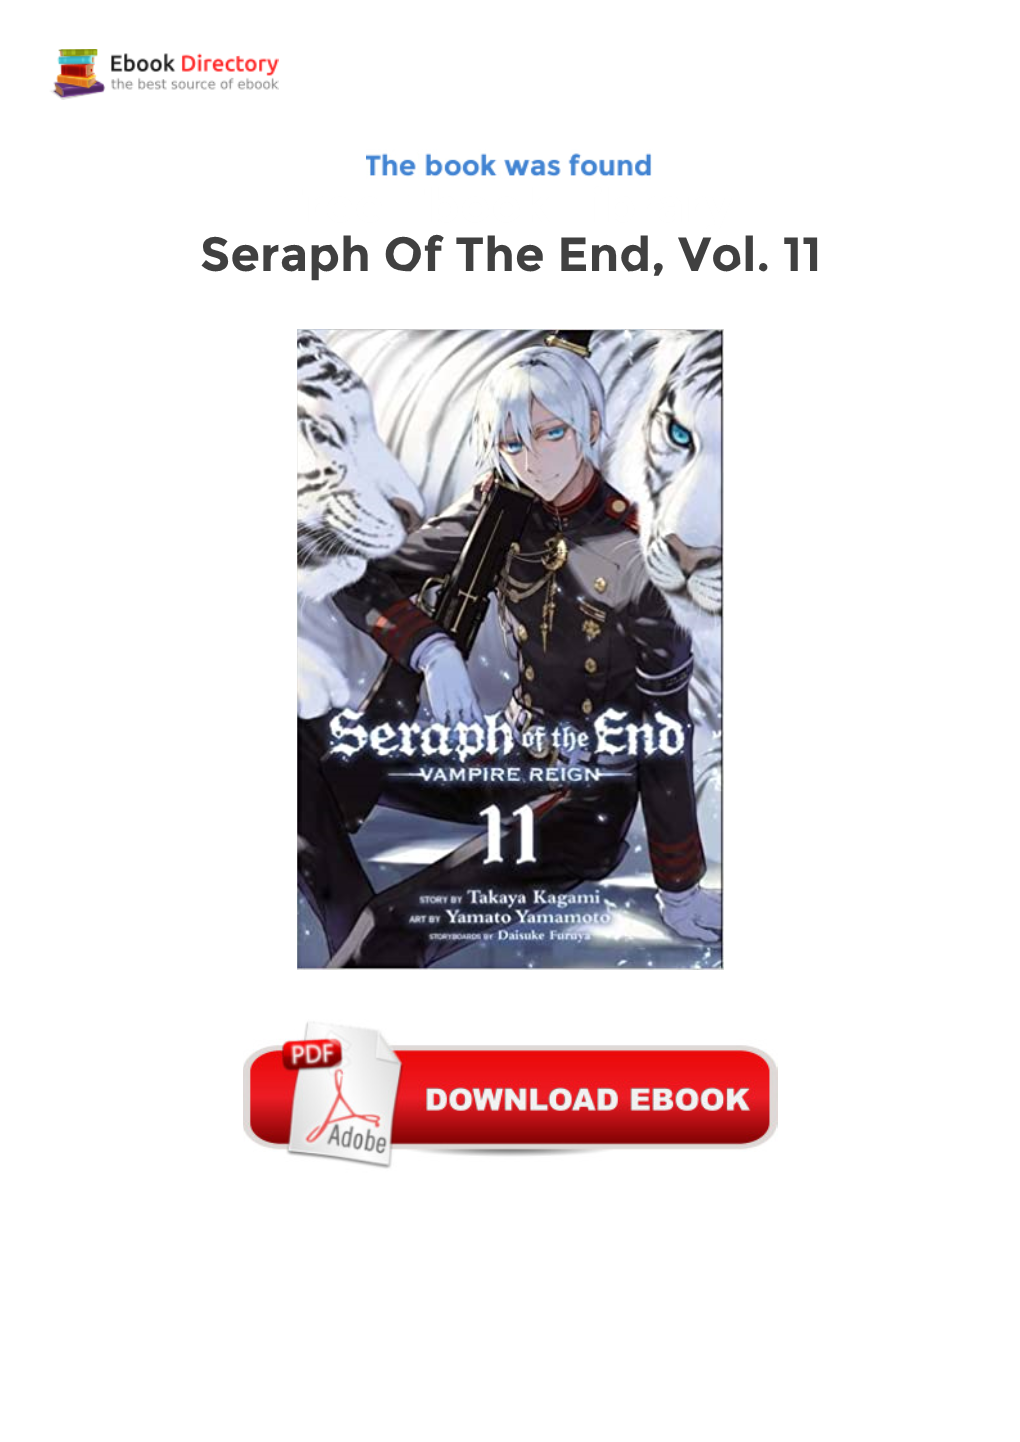 Free Ebook Library Seraph of the End, Vol. 11 in a Post-Apocalyptic World of Vampires Vs